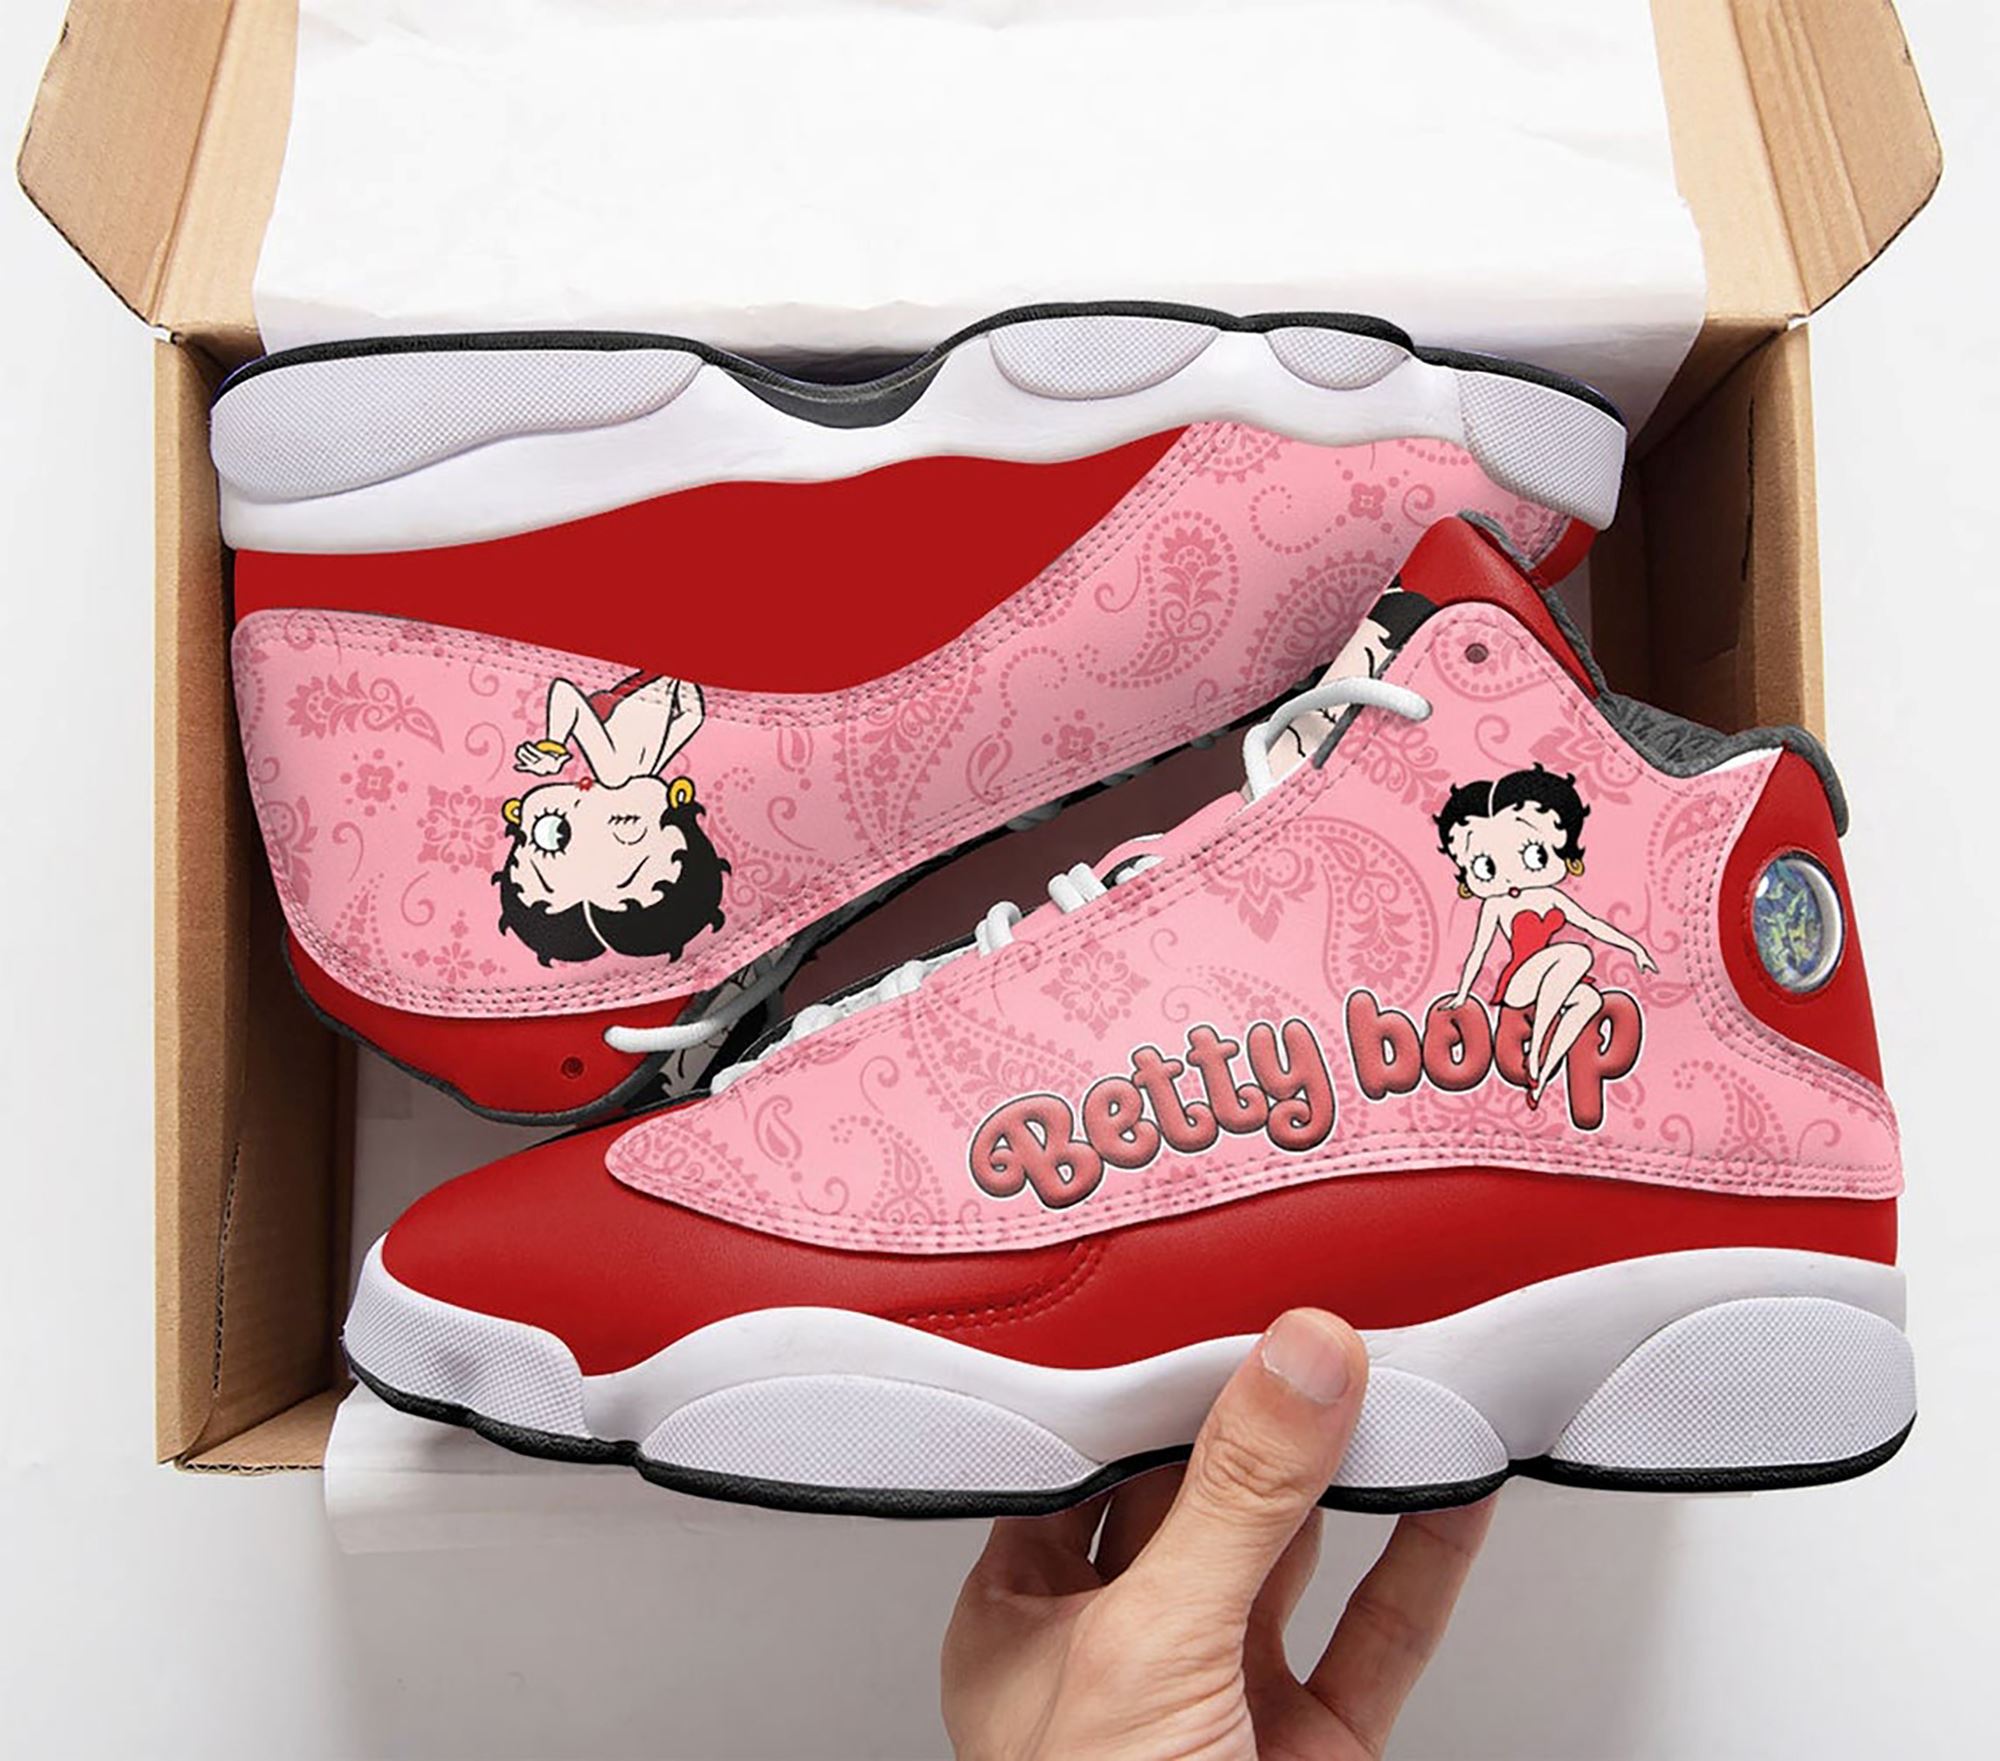 Betty Boop Cartoon Leather Shoes Betty Boop Sneakers Betty Boop Running Shoes Shoes For Betty Boop Lover Cartoon Character Shoes Gift